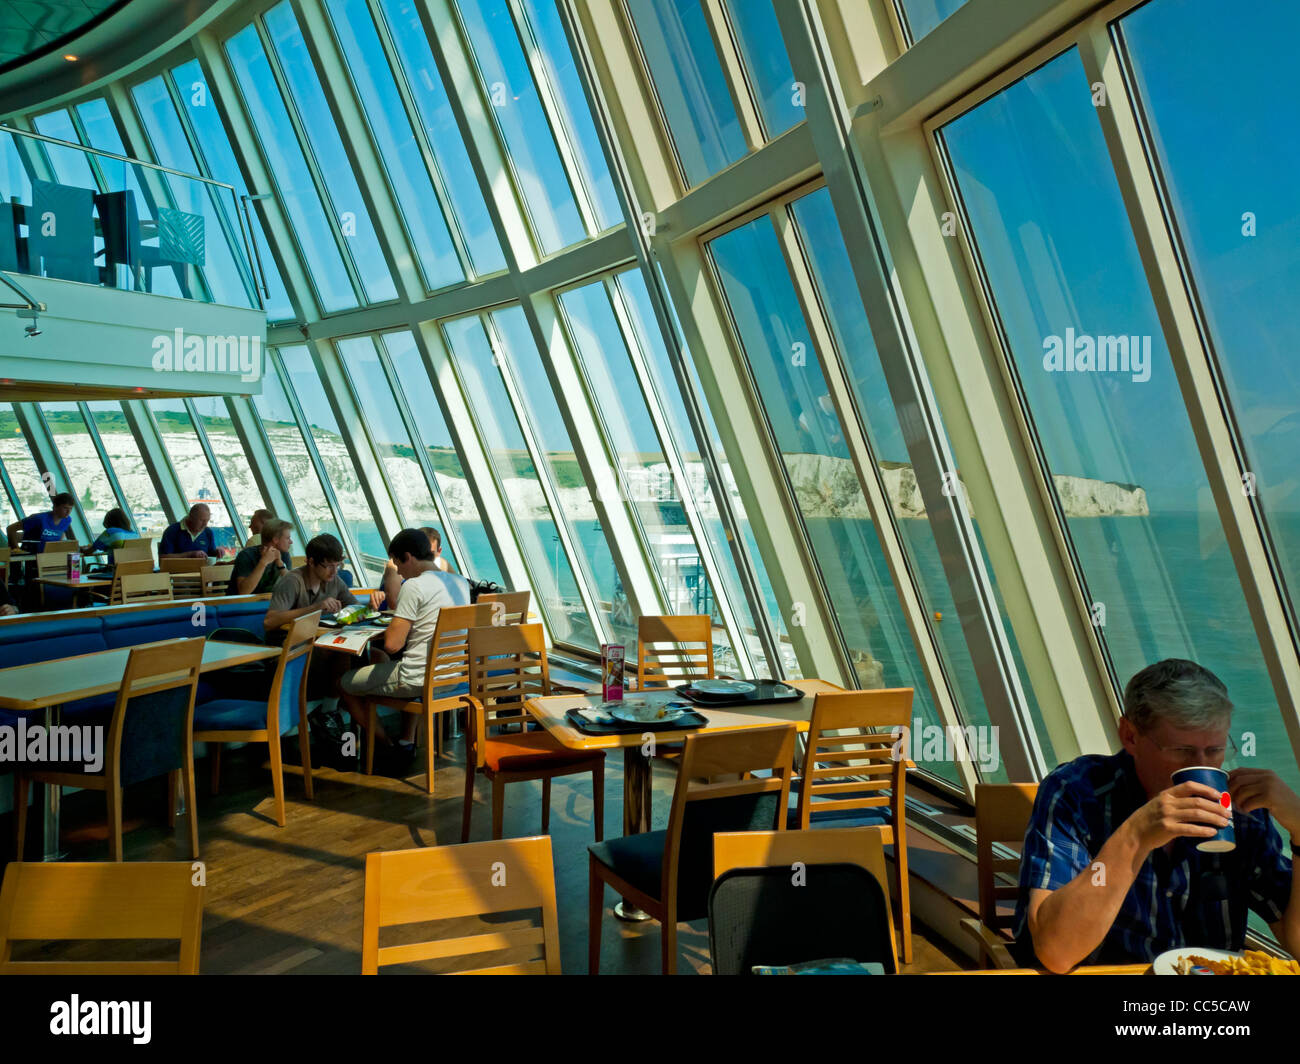 Passengers in the dining area of a cross channel ferry traveling from England to France with the White Cliffs of Dover behind Stock Photo